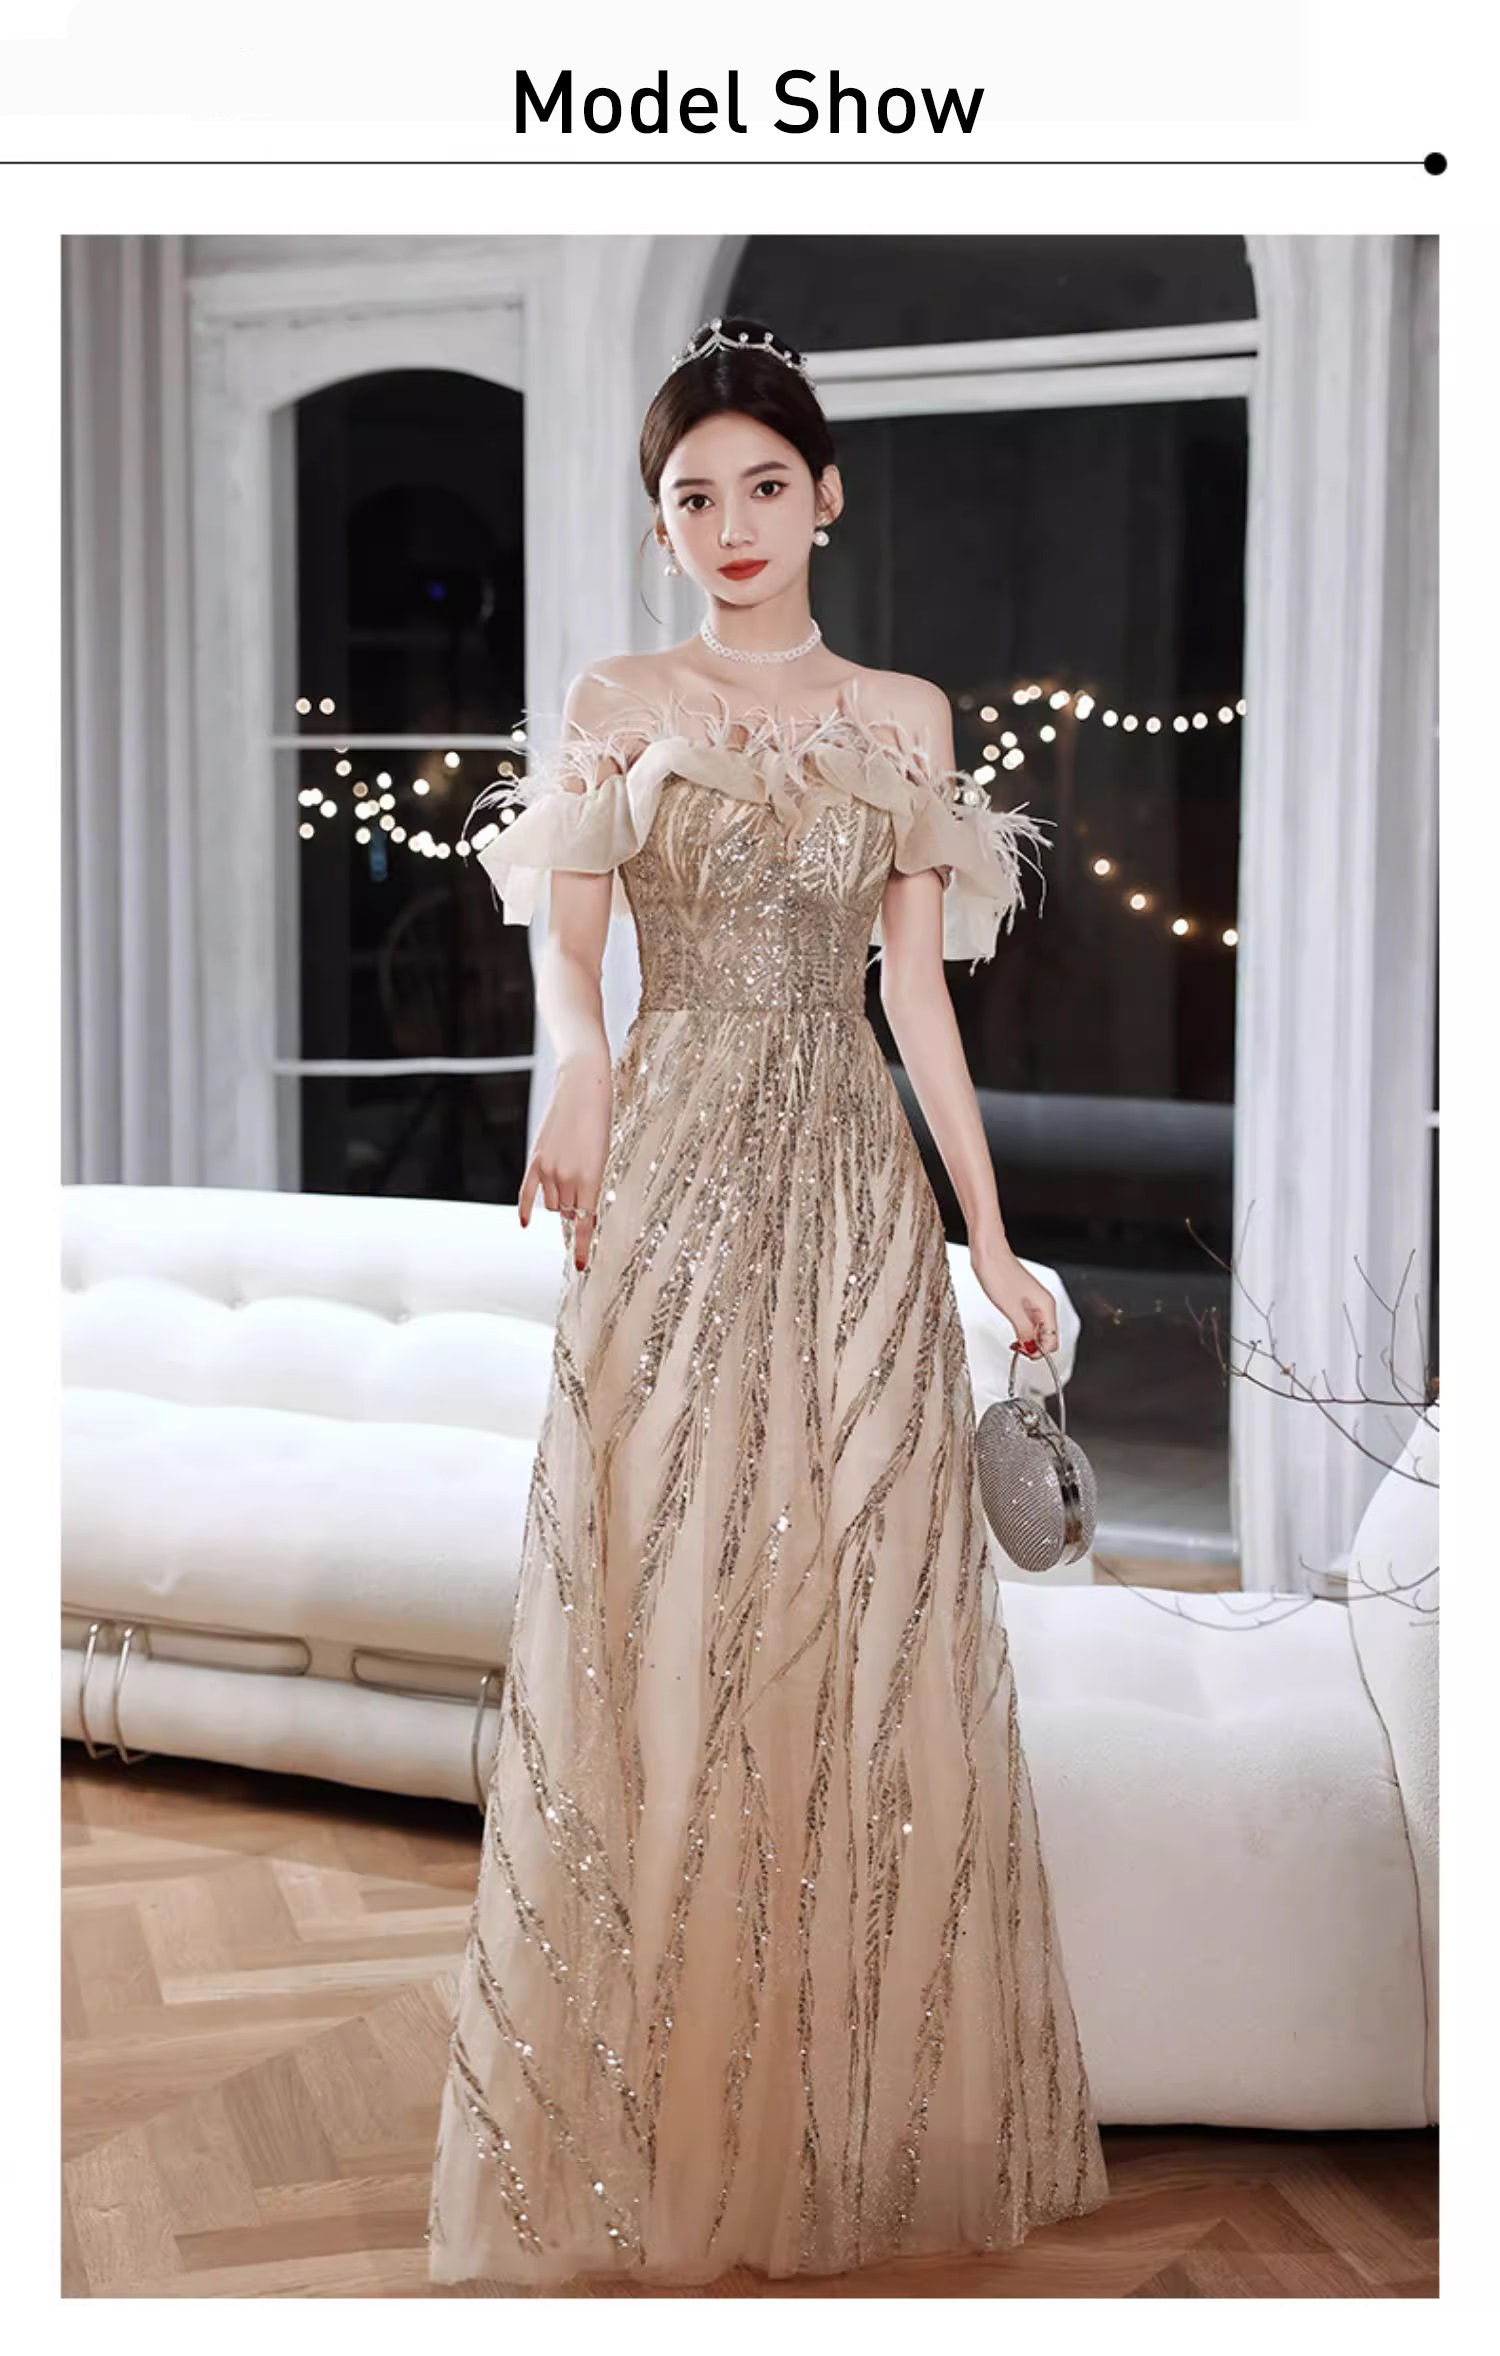 Classy-Off-the-Shoulder-Champagne-Birthday-Party-Evening-Prom-Dress09